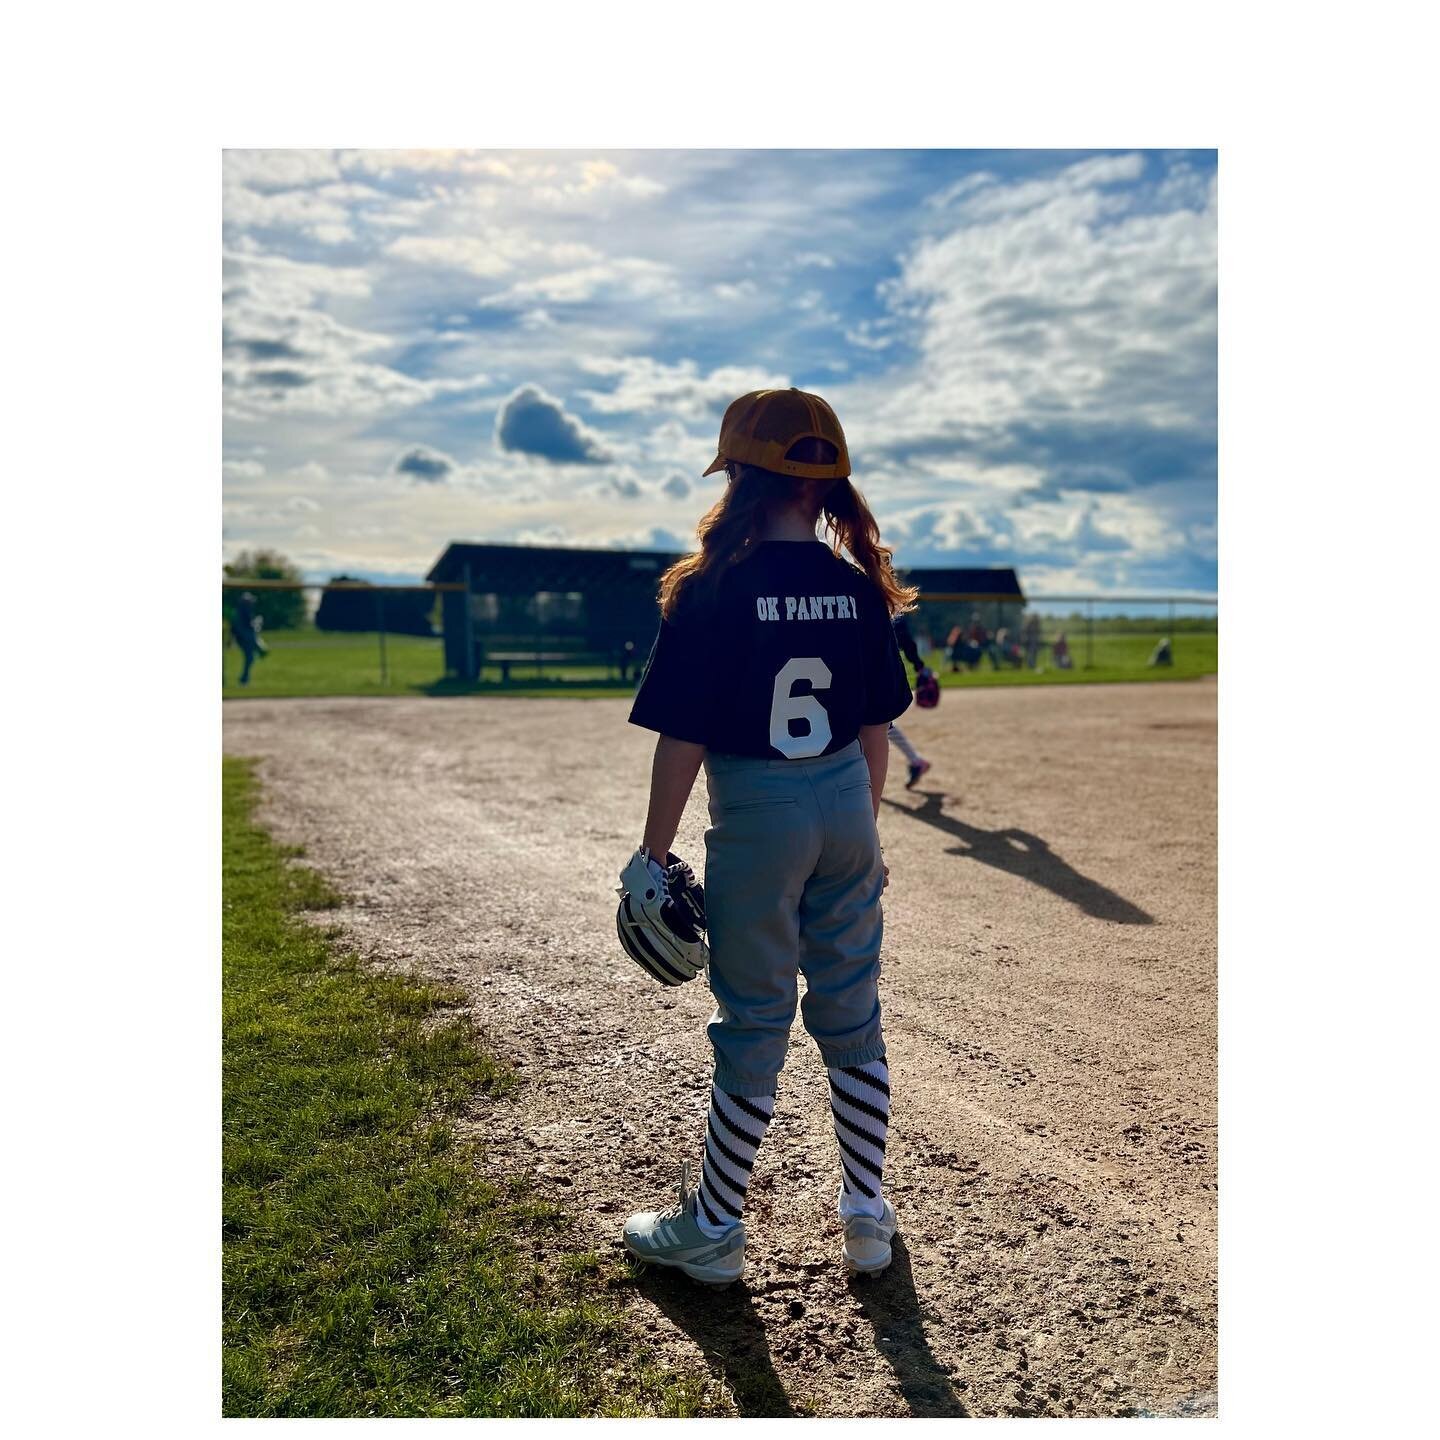 GO TEAM OKP !!!!!!! Seasons first game went off - the girls are spunky + sweet and really enjoying the first game win.  Thanks Coach Kevin !

#columbiacounty #columbiacountyny #columbiacountylittleleague #softball #upstatelife #upstateny #kinderhook 